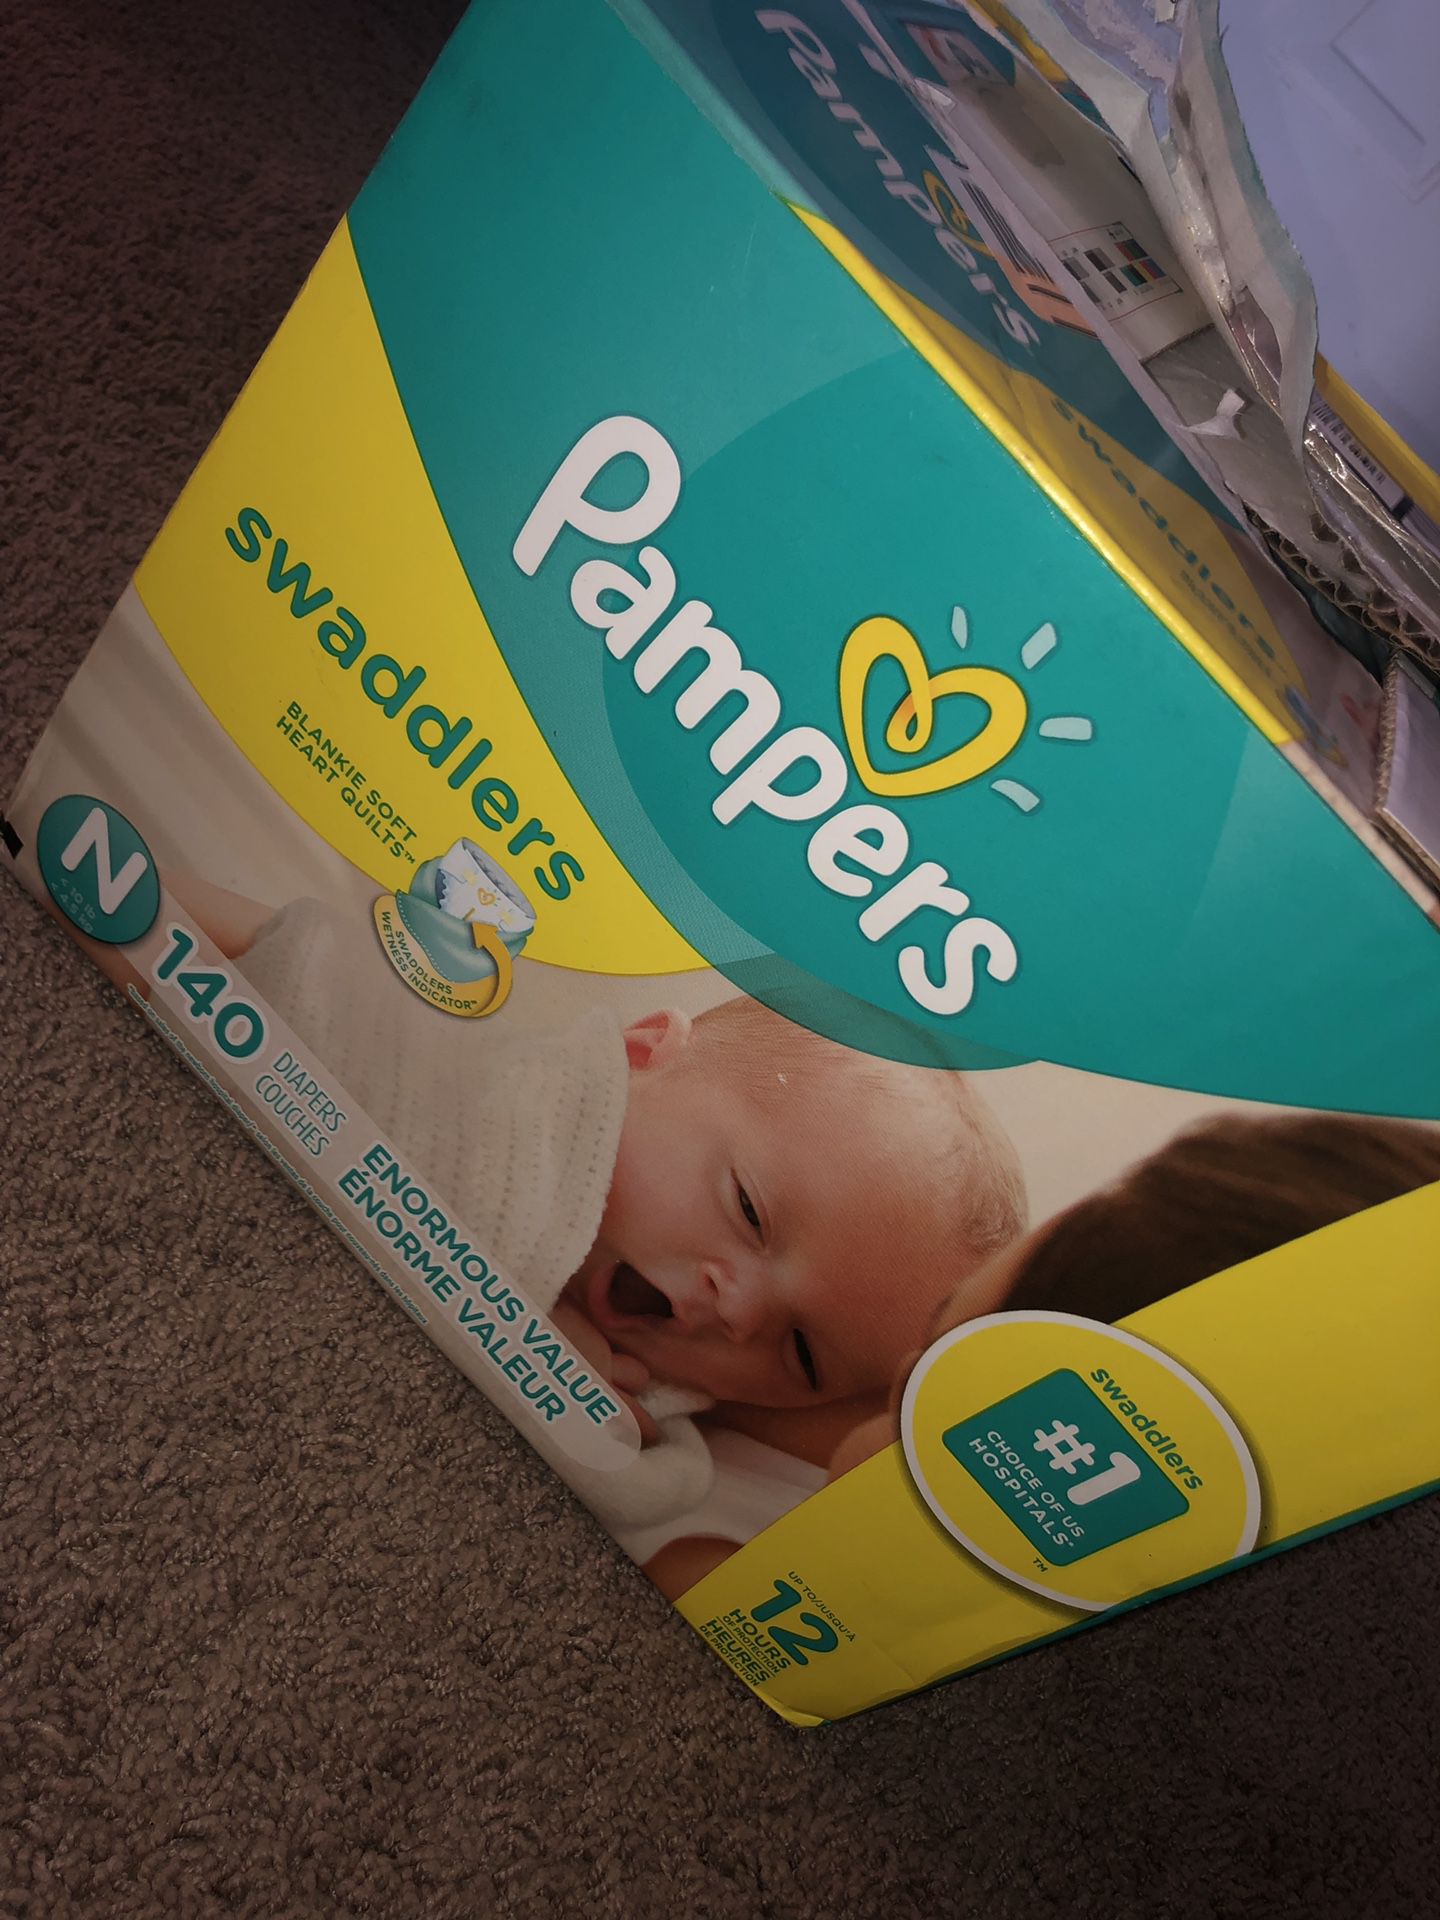 Baby Pampers diapers